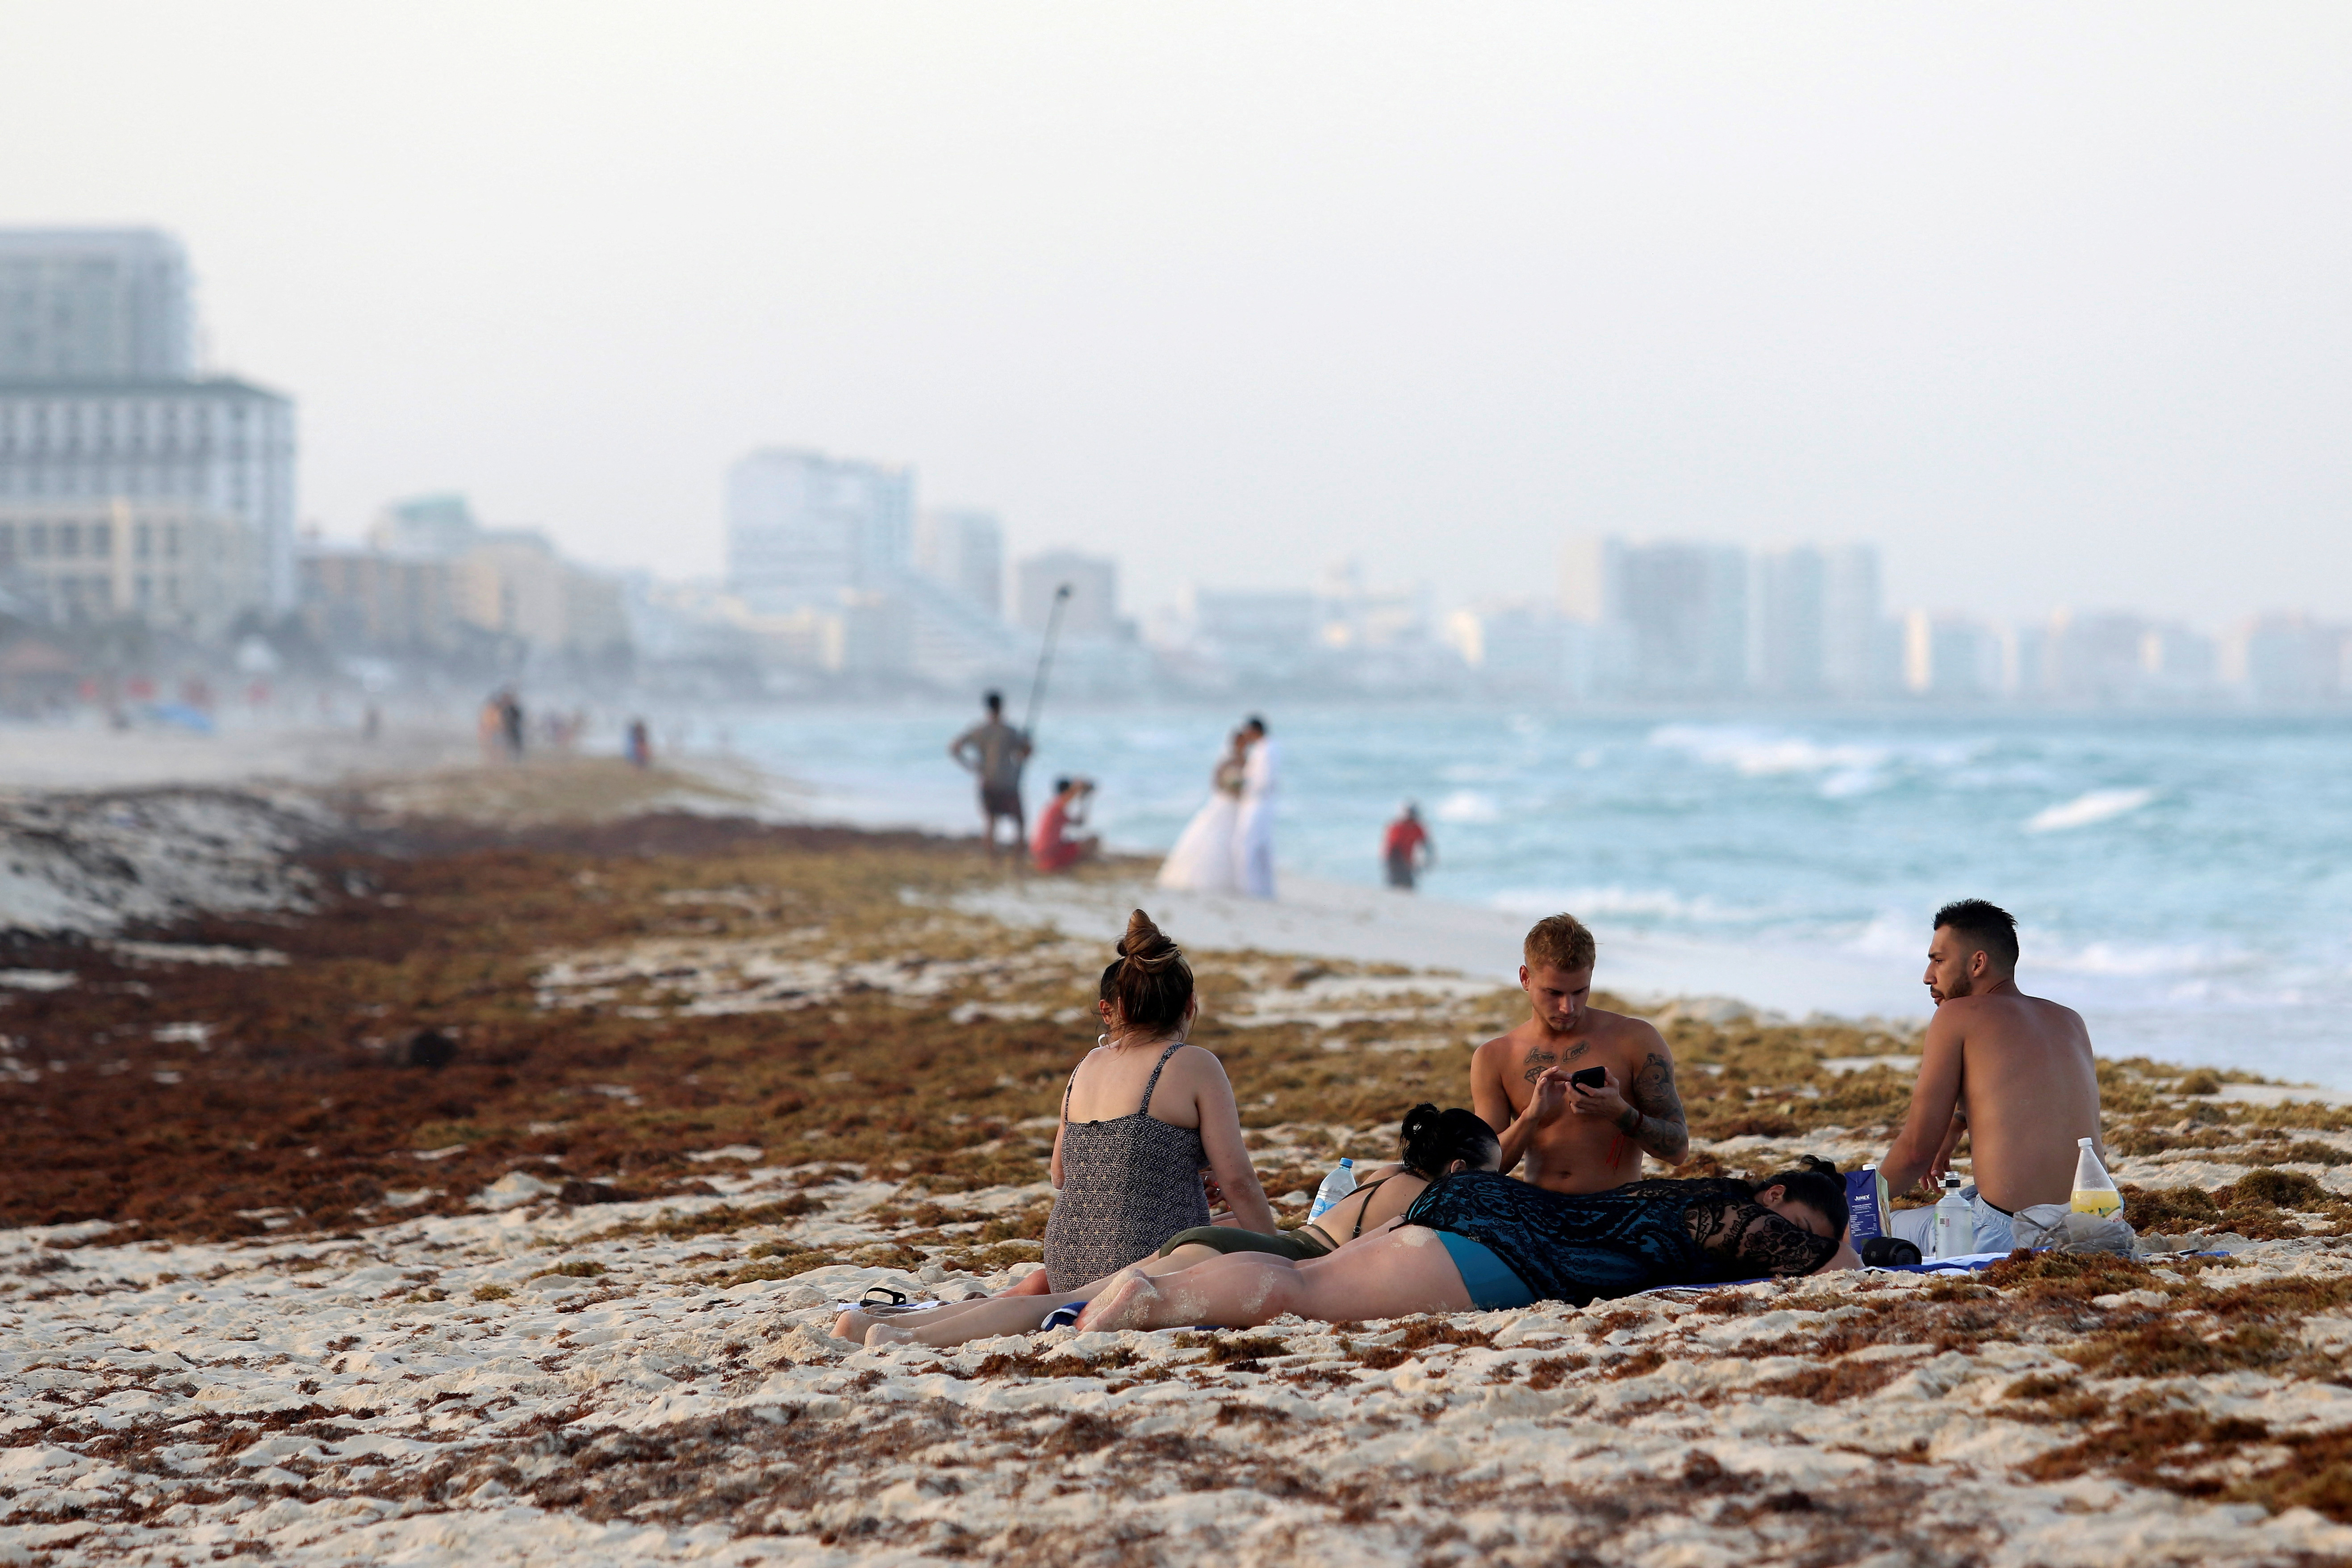 Tourists are seen on a beach covered wth seaweed in Cancun